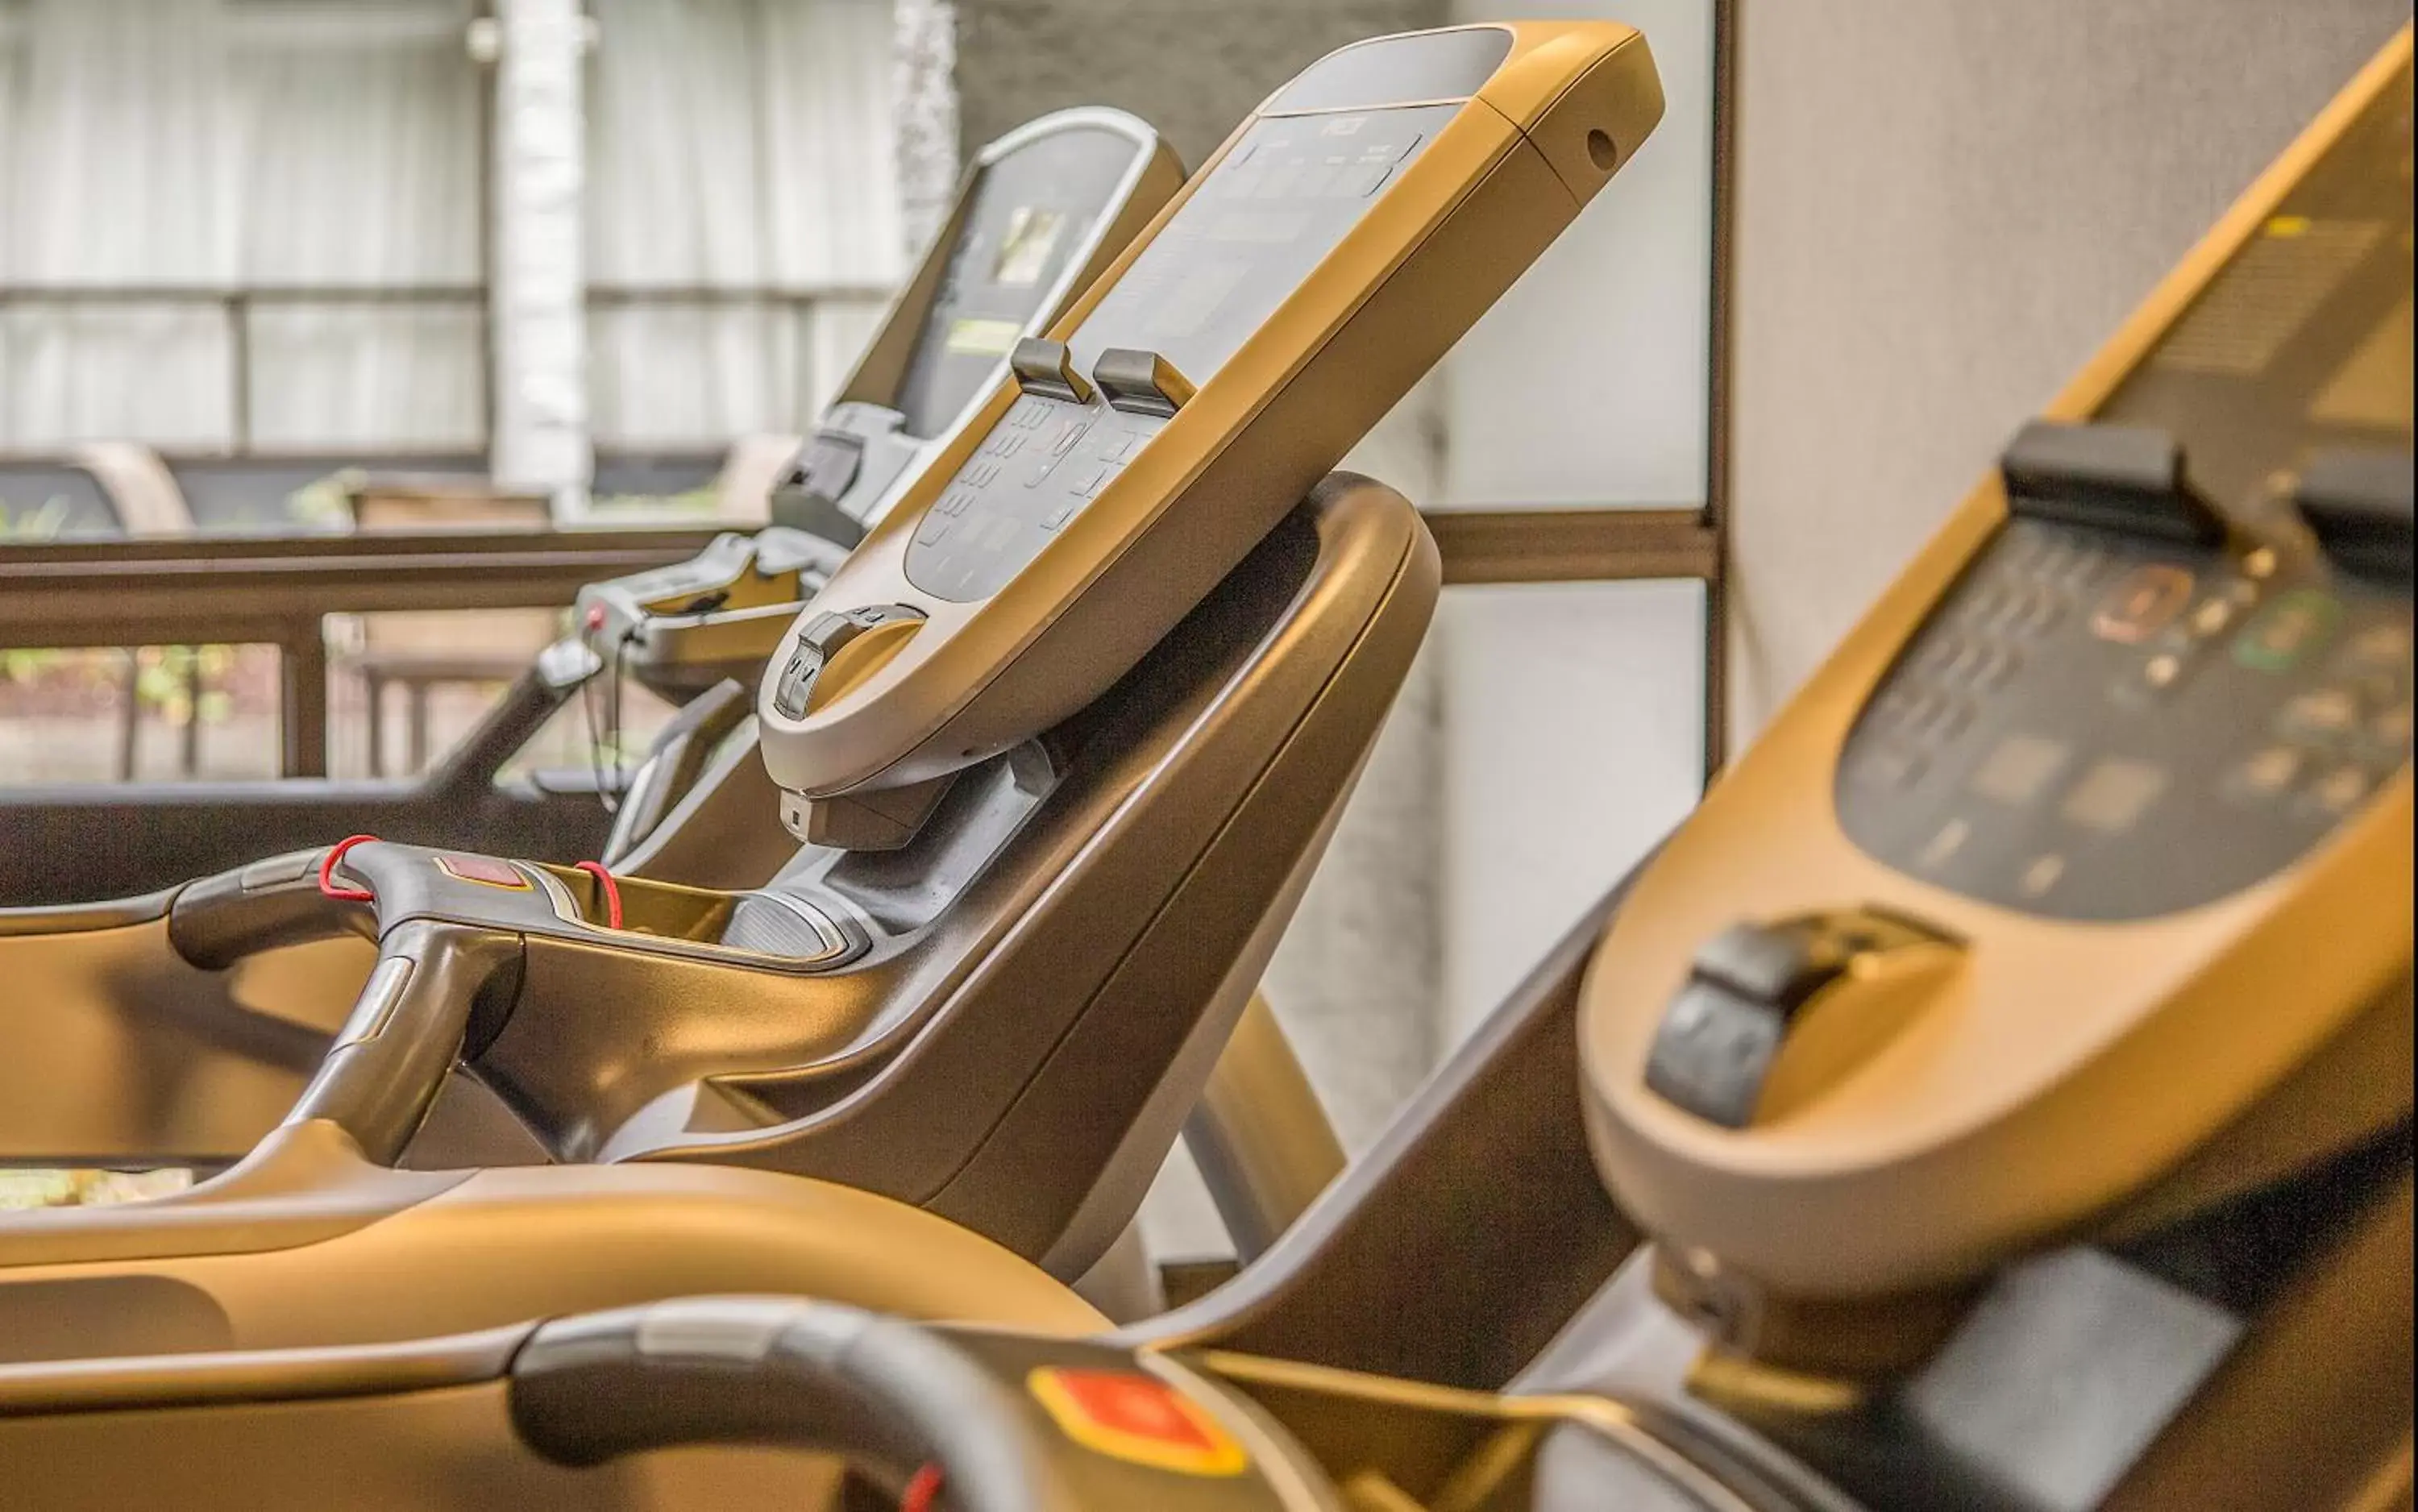 Fitness centre/facilities, Fitness Center/Facilities in Hotel 116, A Coast Hotel Bellevue